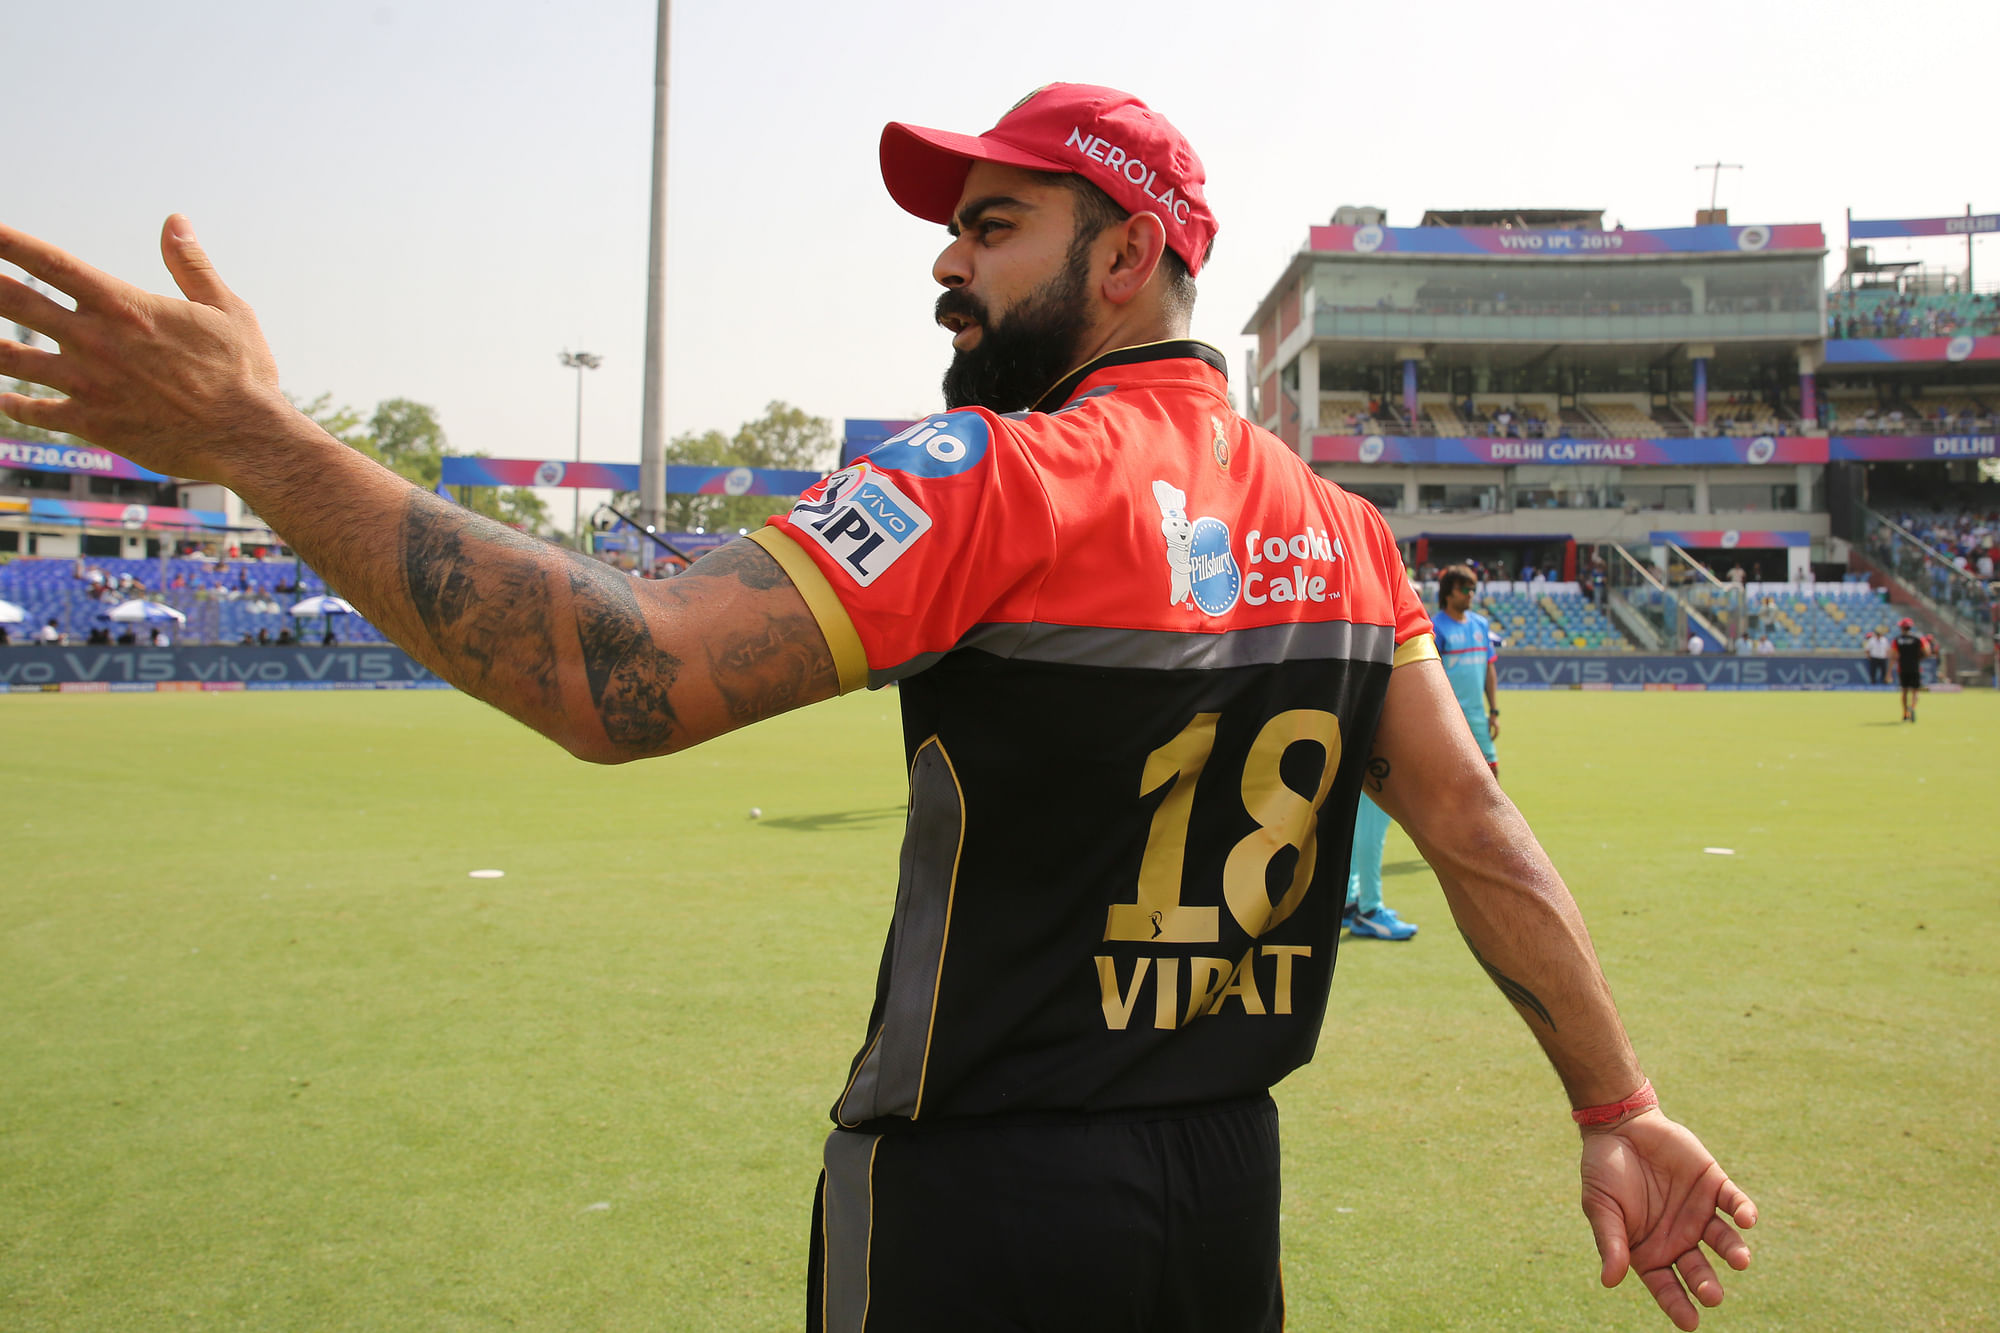 RCB captain Virat Kohli admitted that the home side played better in crunch moments after loss to Delhi Capitals.